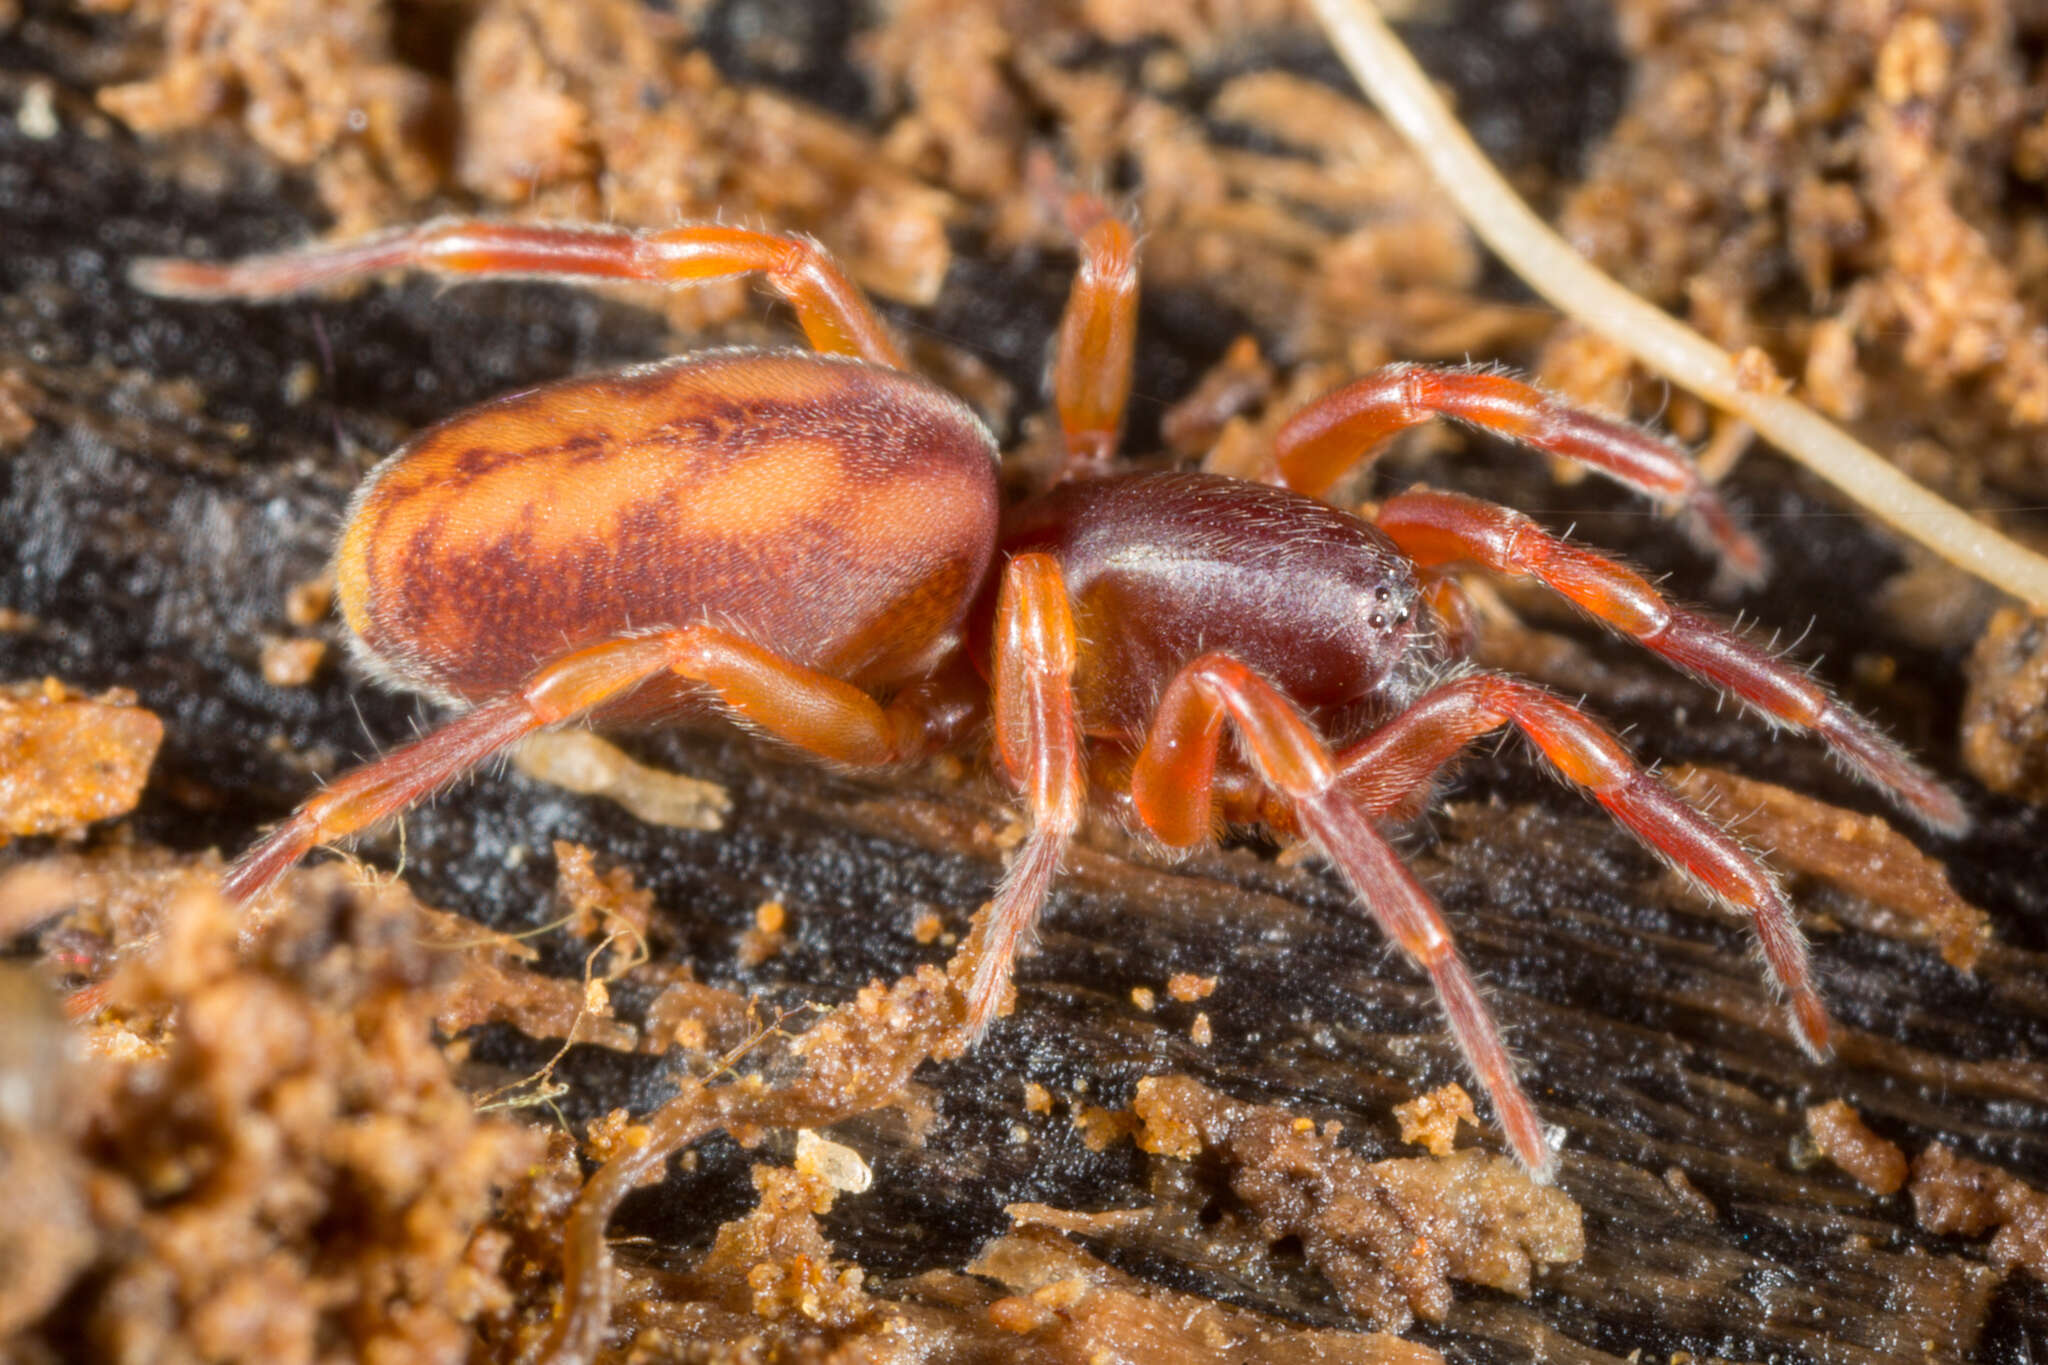 Image of huttoniid spiders